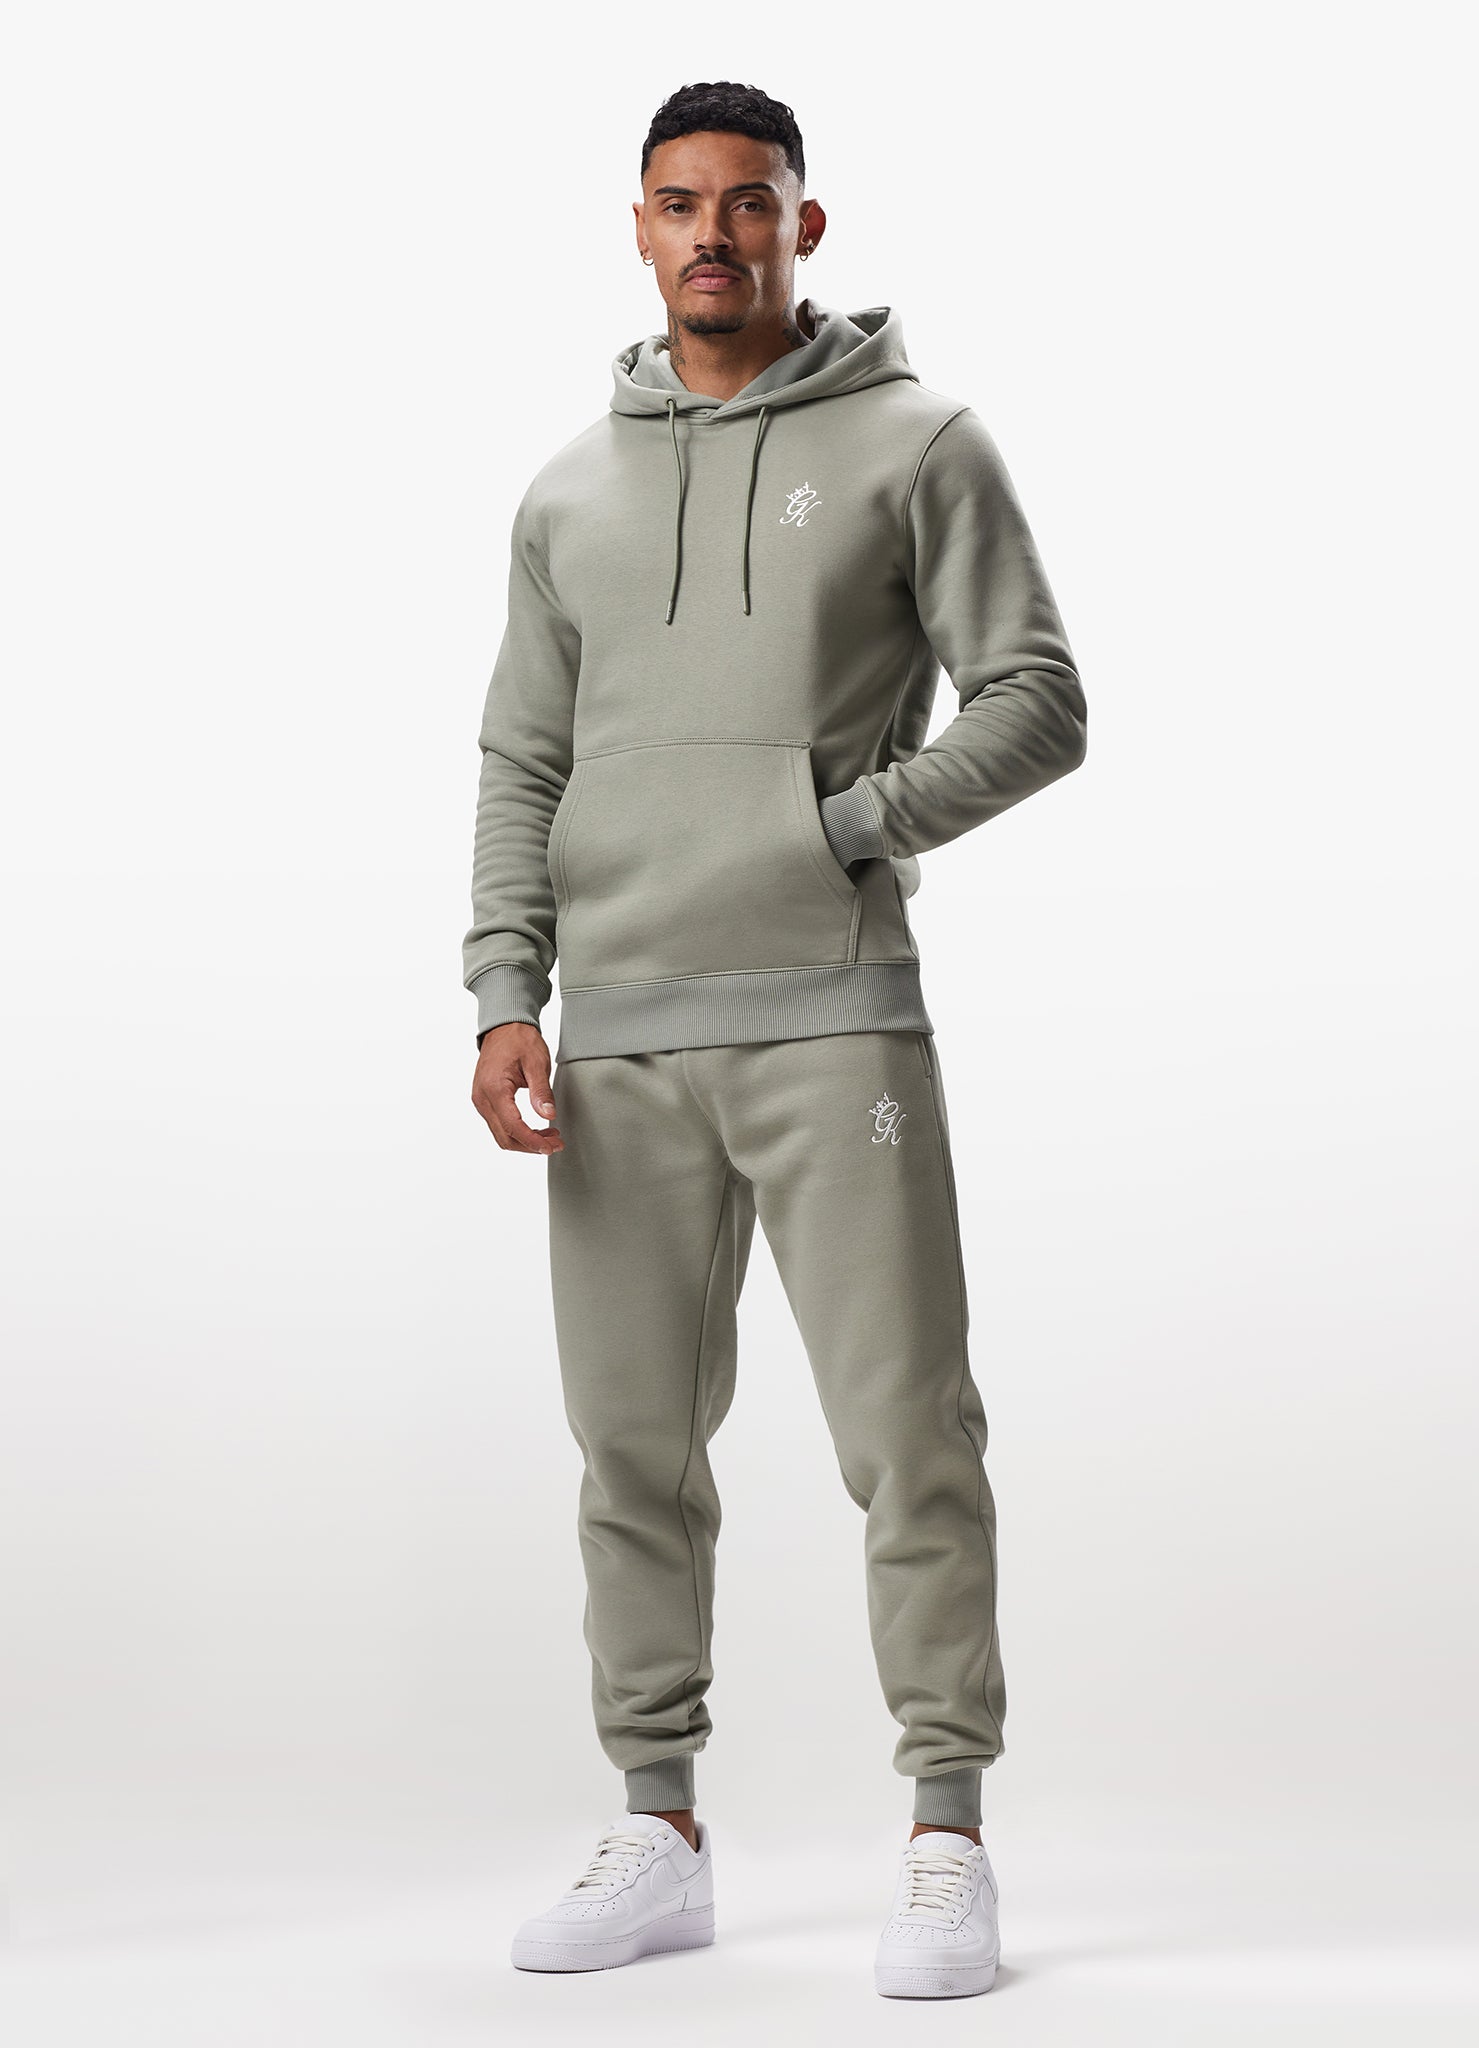 New Gym King Full Hooded Tracksuit Top & Bottoms Gym Wear Muscle Fit Steel  Grey